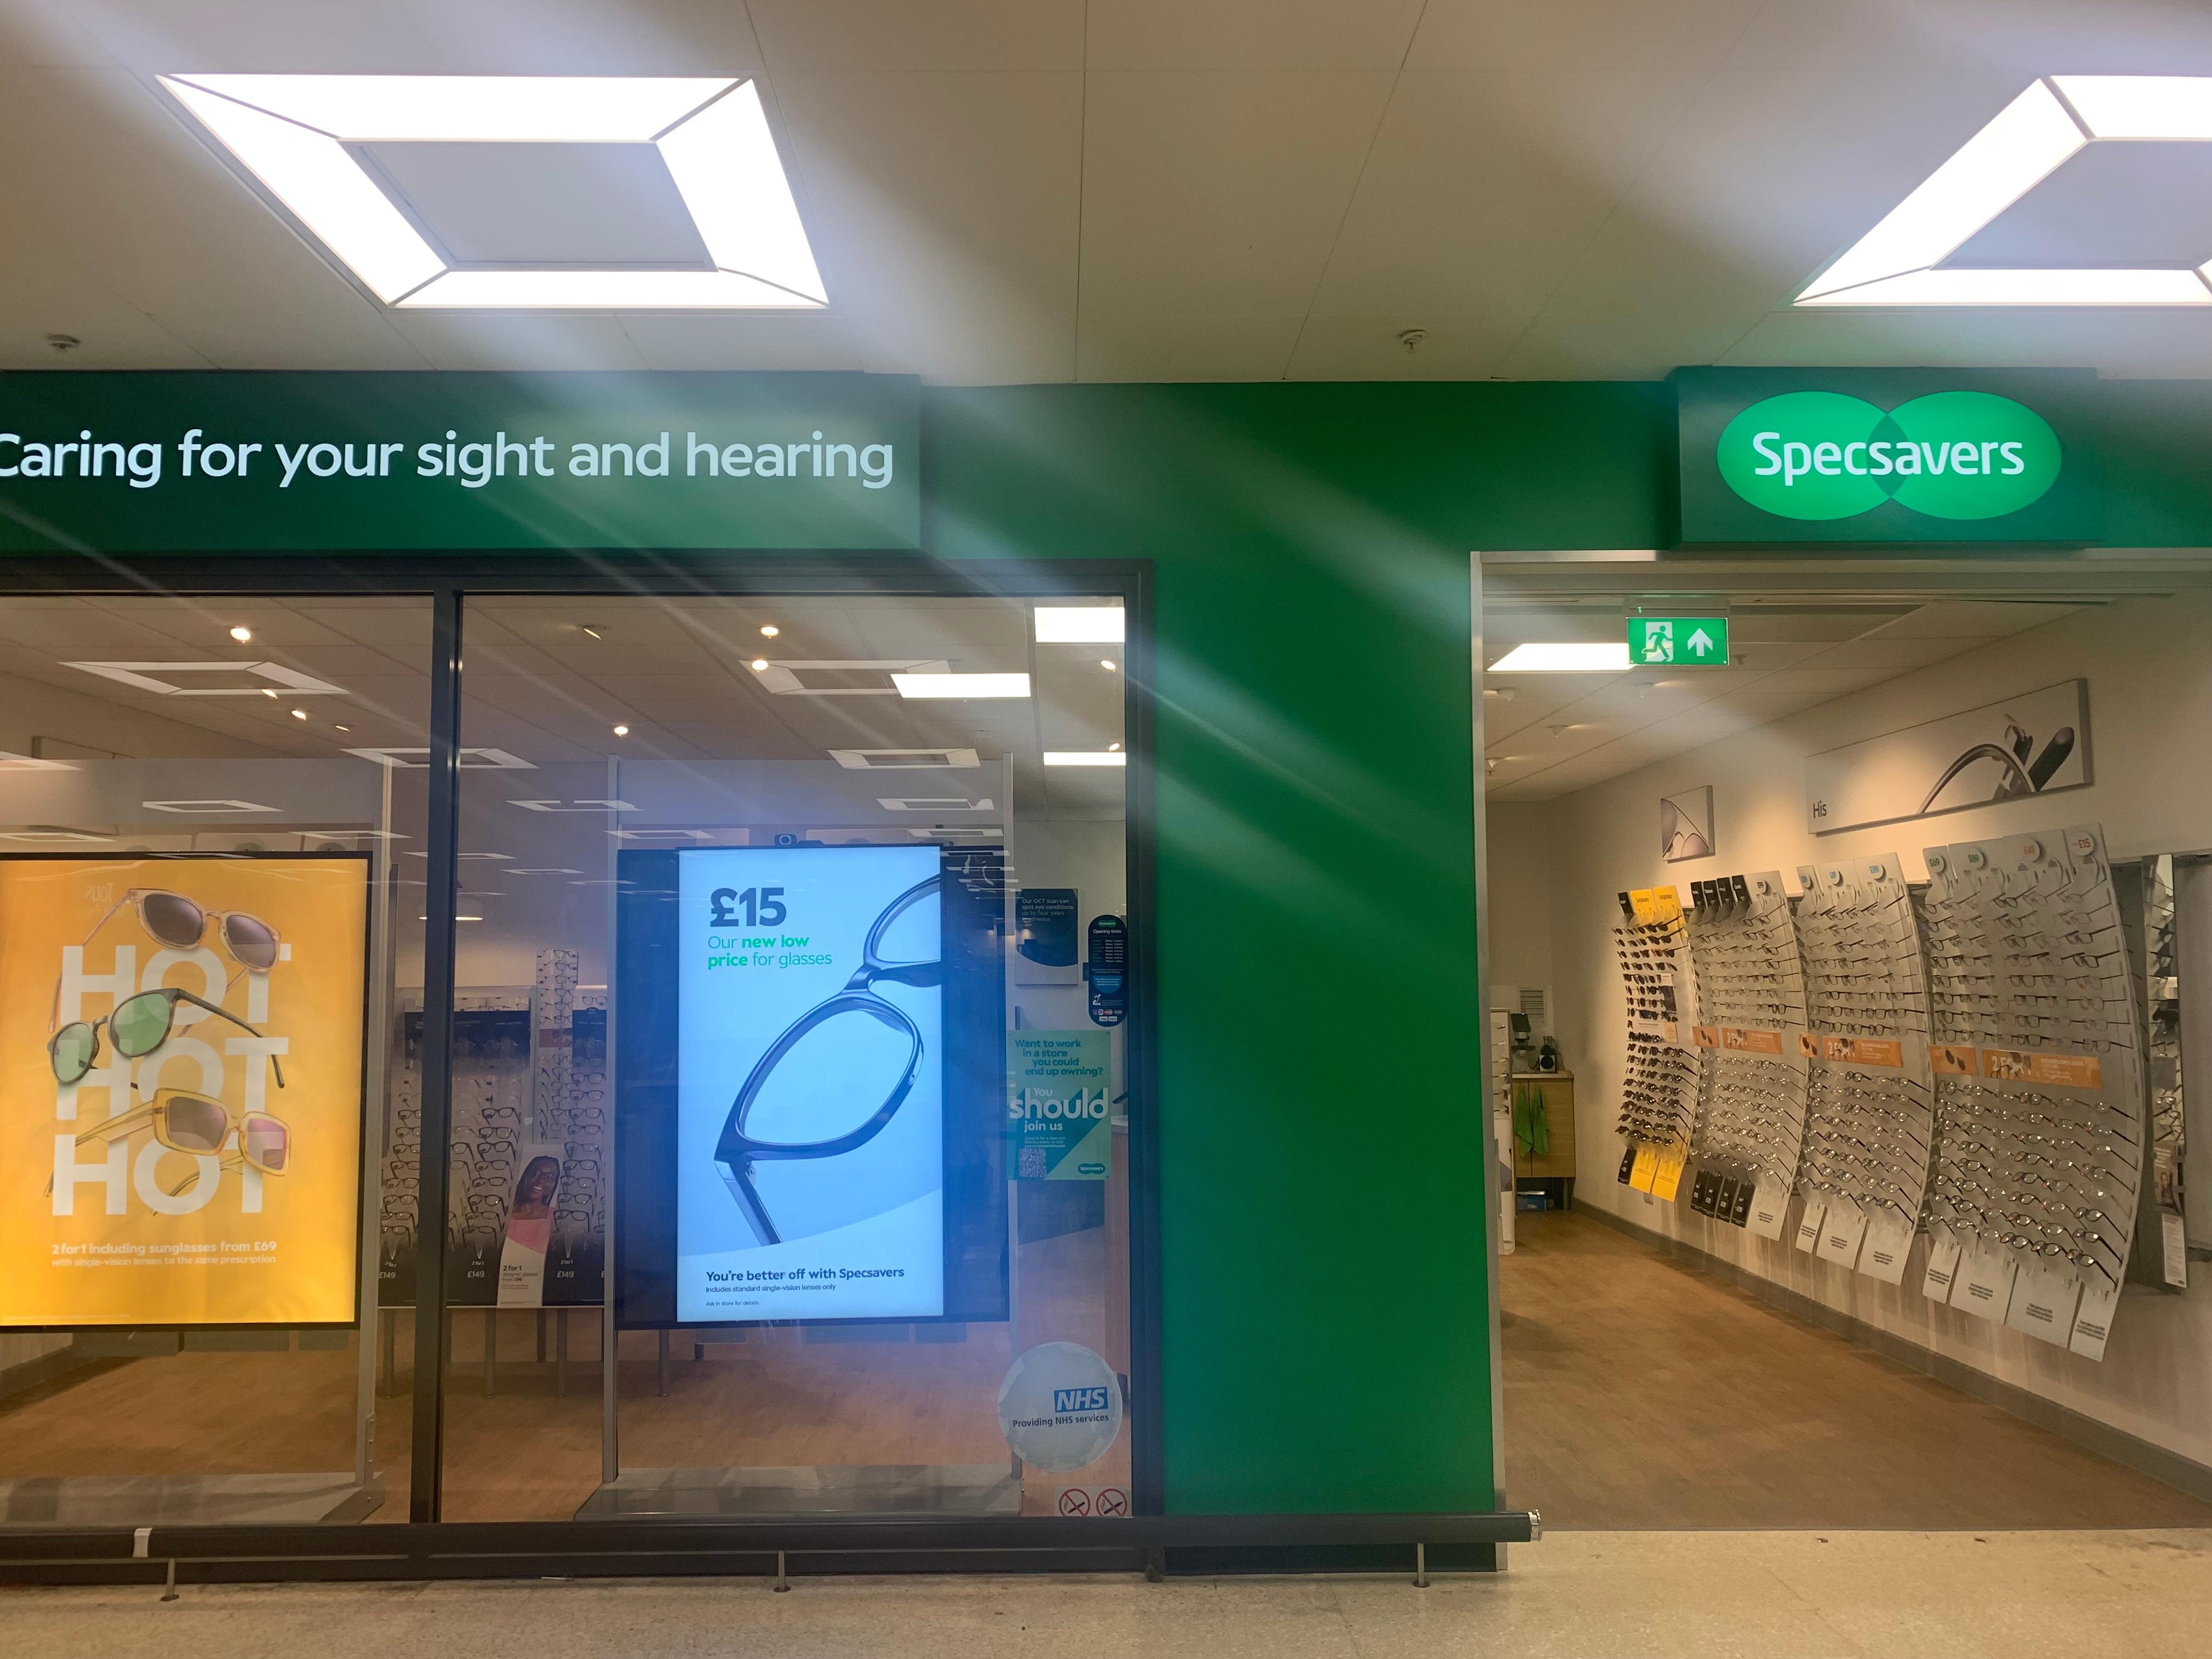 Images Specsavers Opticians and Audiologists - Emersons Green Sainsbury's